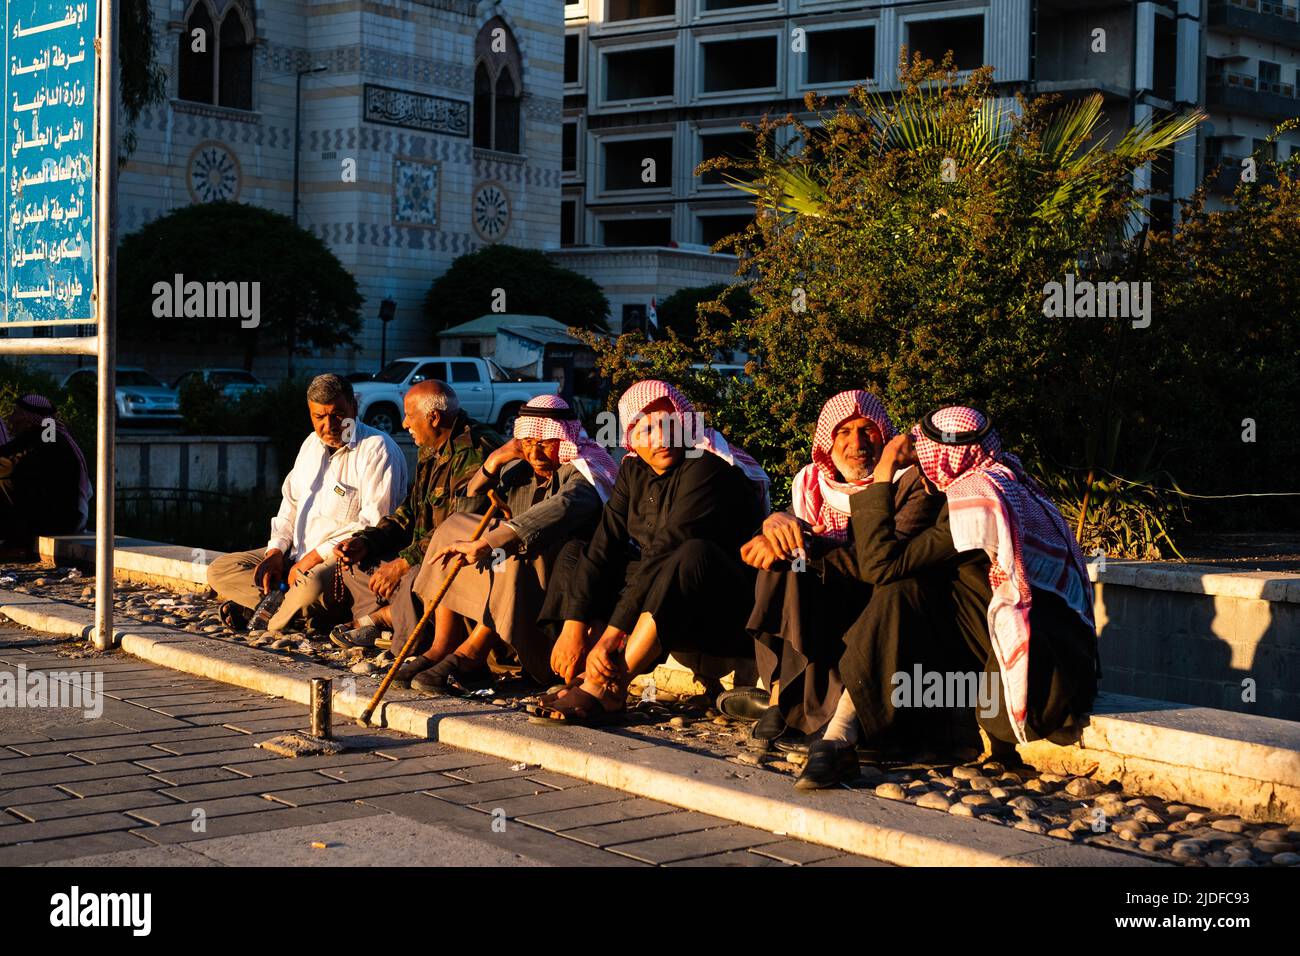 Damascus, Syria - May, 2022: Group of older arabic men on street in Damascus, Syria Stock Photo